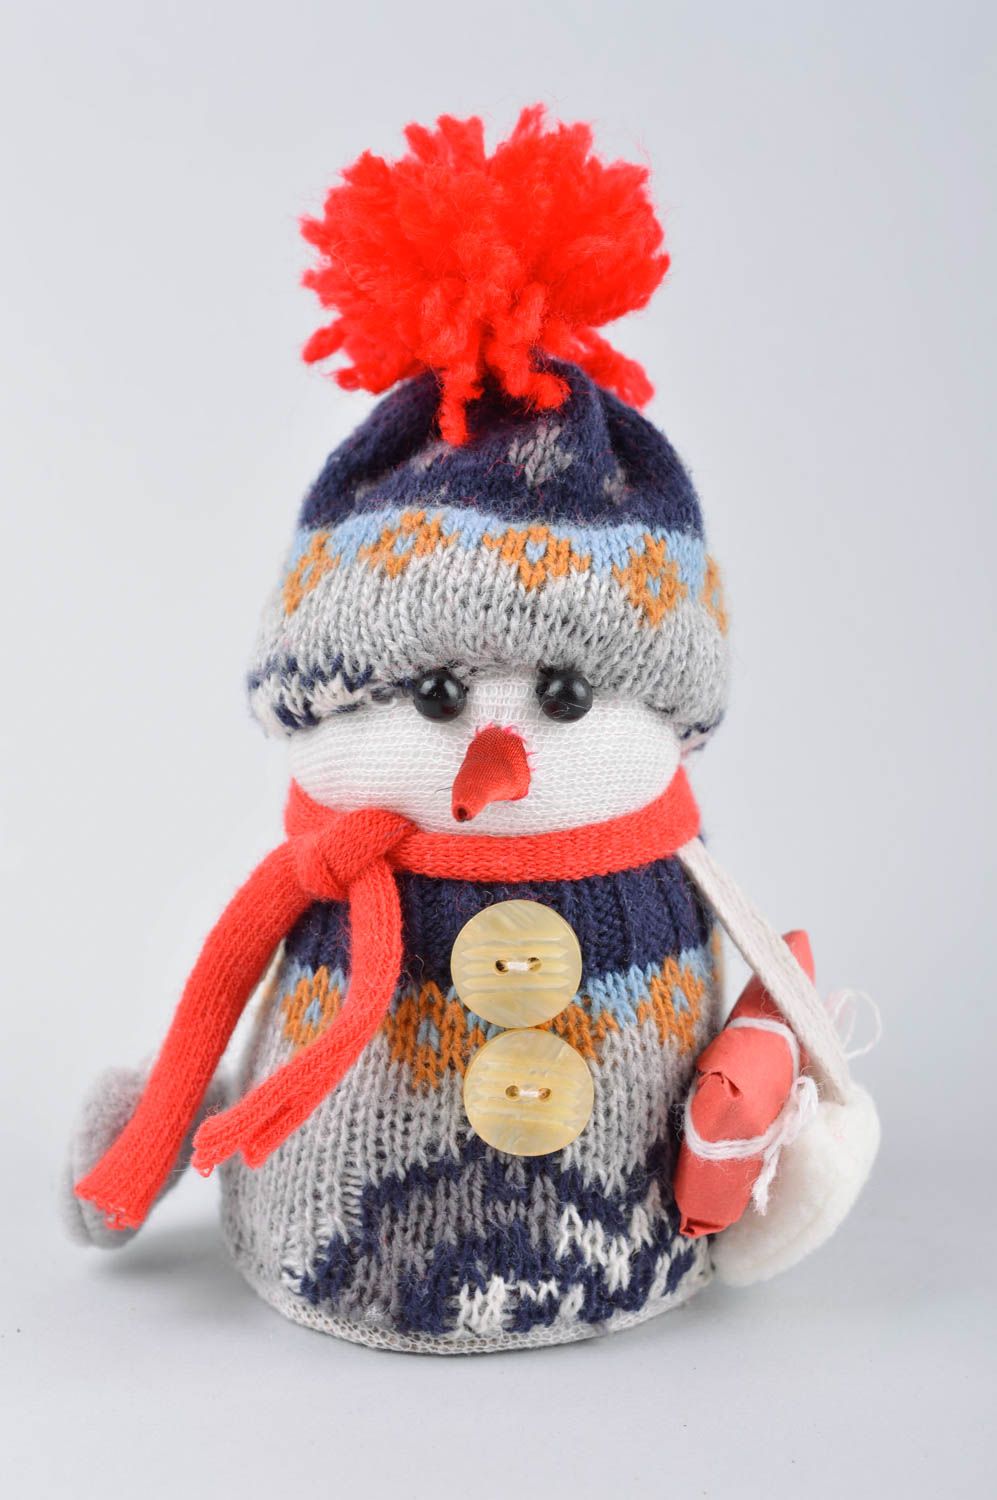 Handmade Christmas interior ideas soft toy present for kids decorative use only photo 2